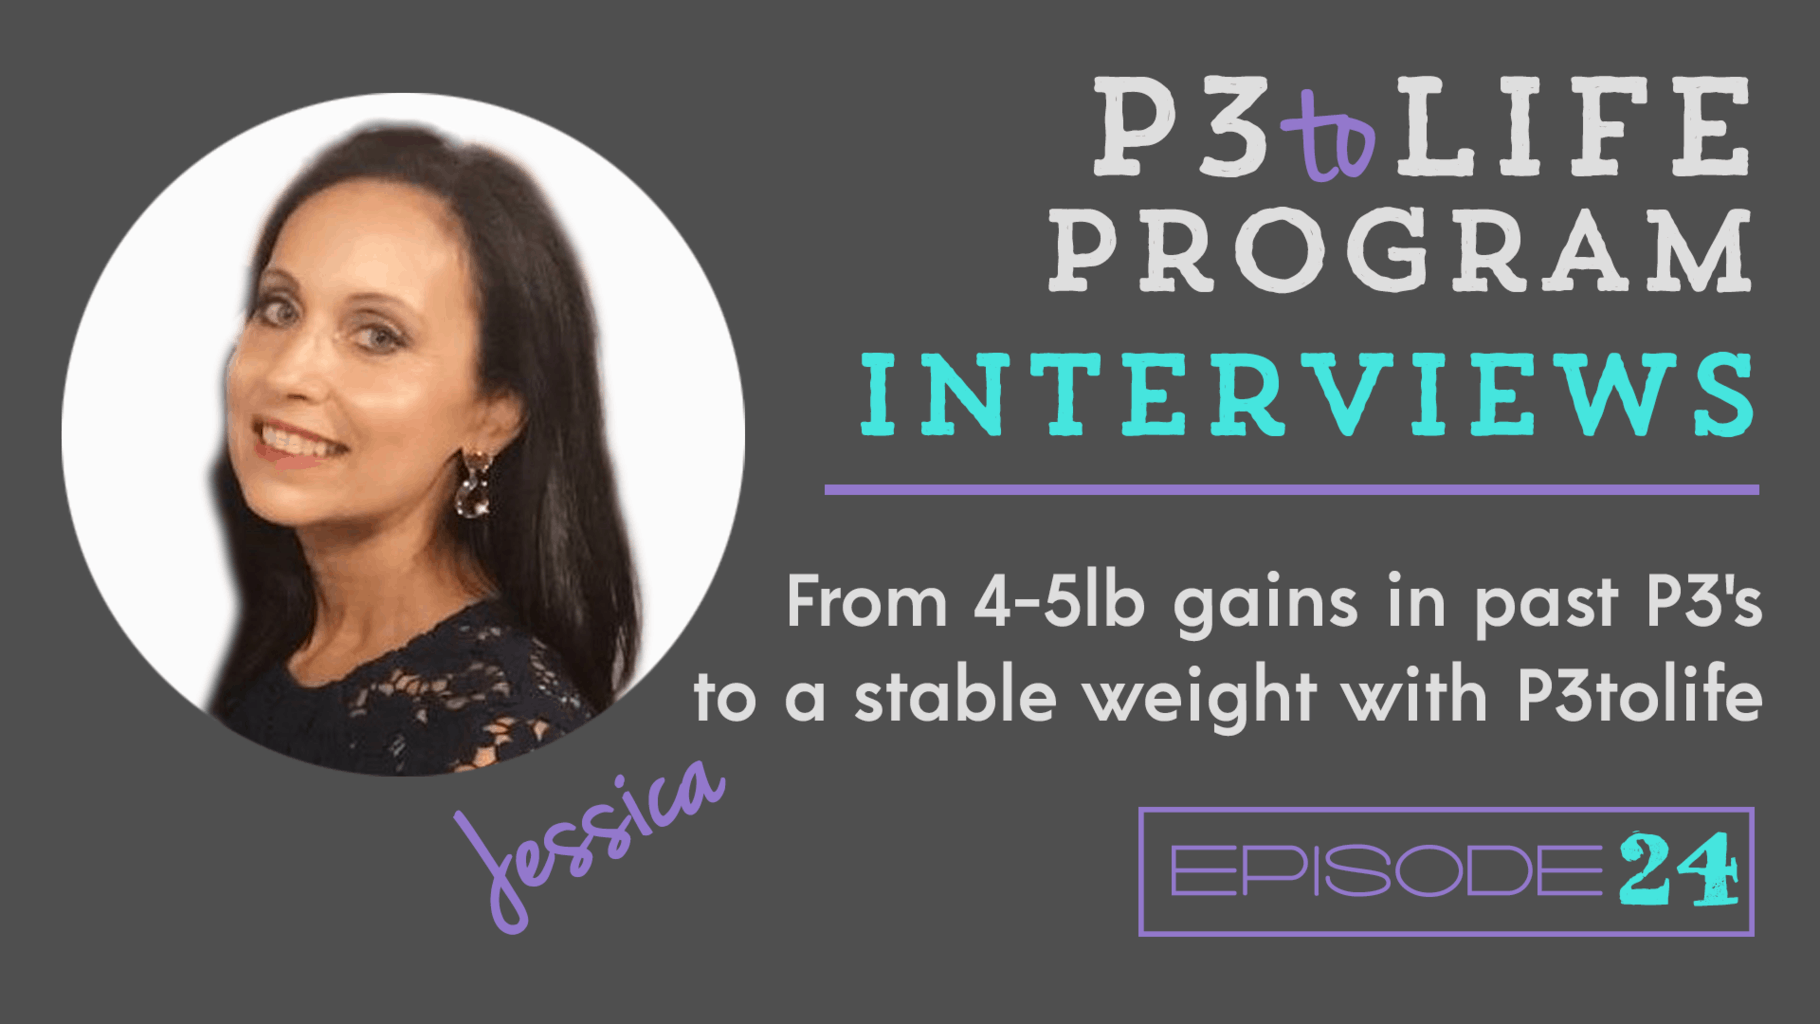 p3tolife-past-phase-3-gains-to-stable-weight-with-p3tolife-jessica-episode-24